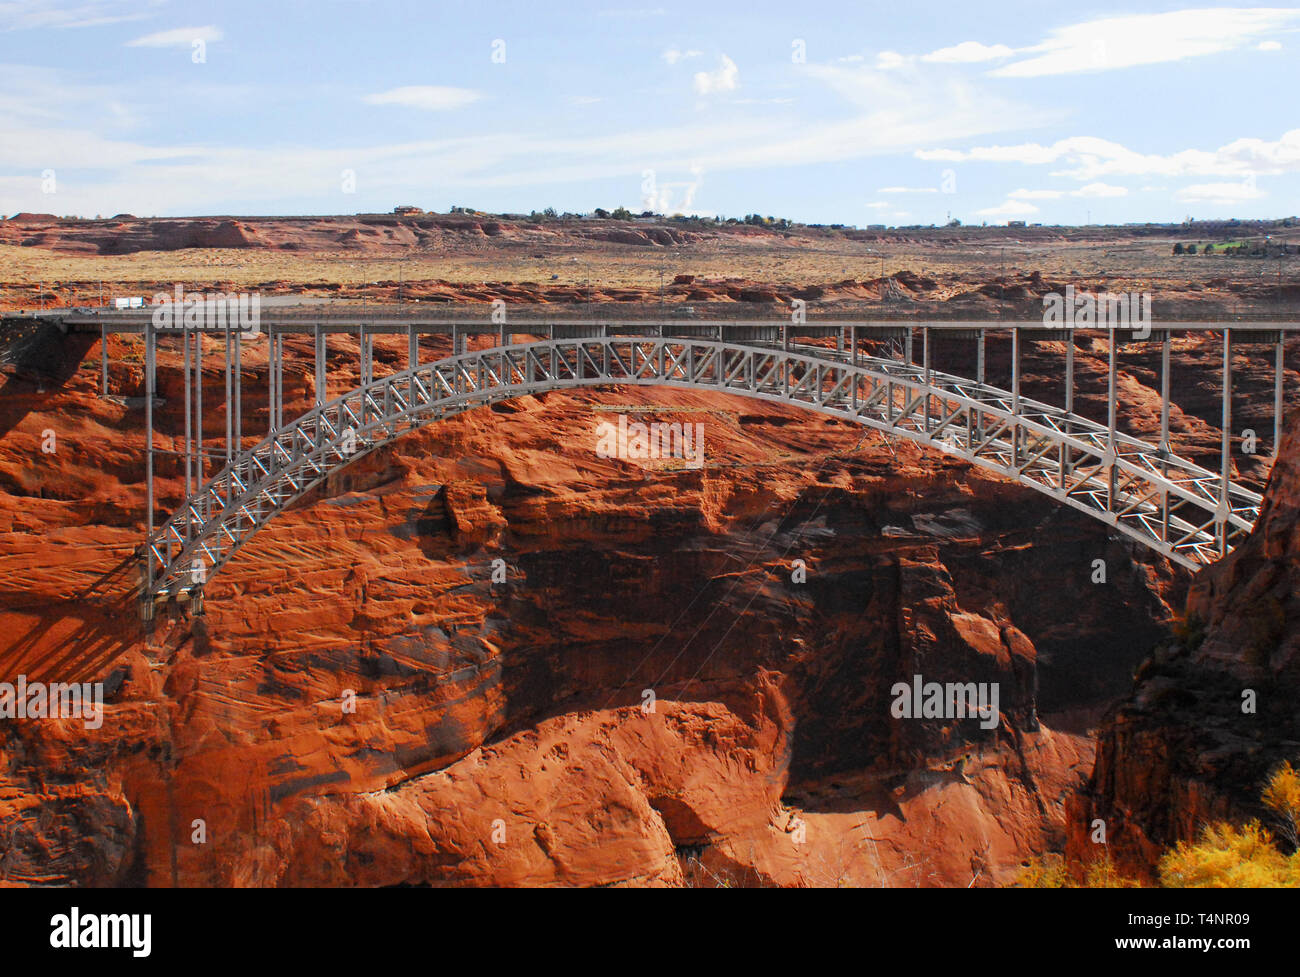 The Glen Canyon Dam bridge carries travelers on route 89 over the beautiful Colorado river gorge near Page Arizona, USA. Stock Photo